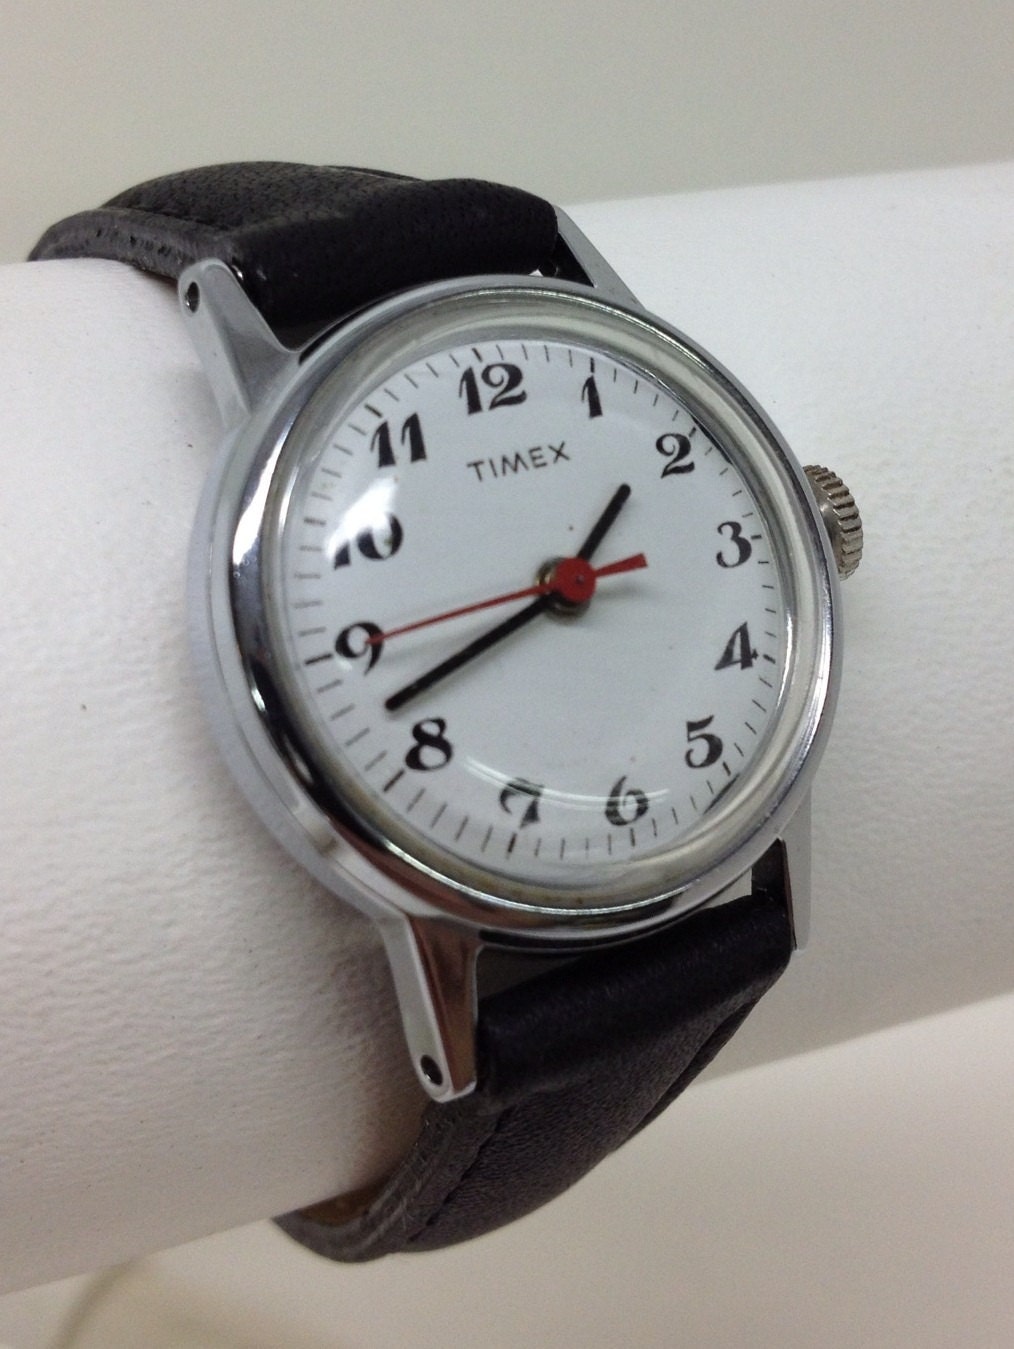 Timex Ladies Watch Mechanical Wind Chrome by Watchnthisnthat